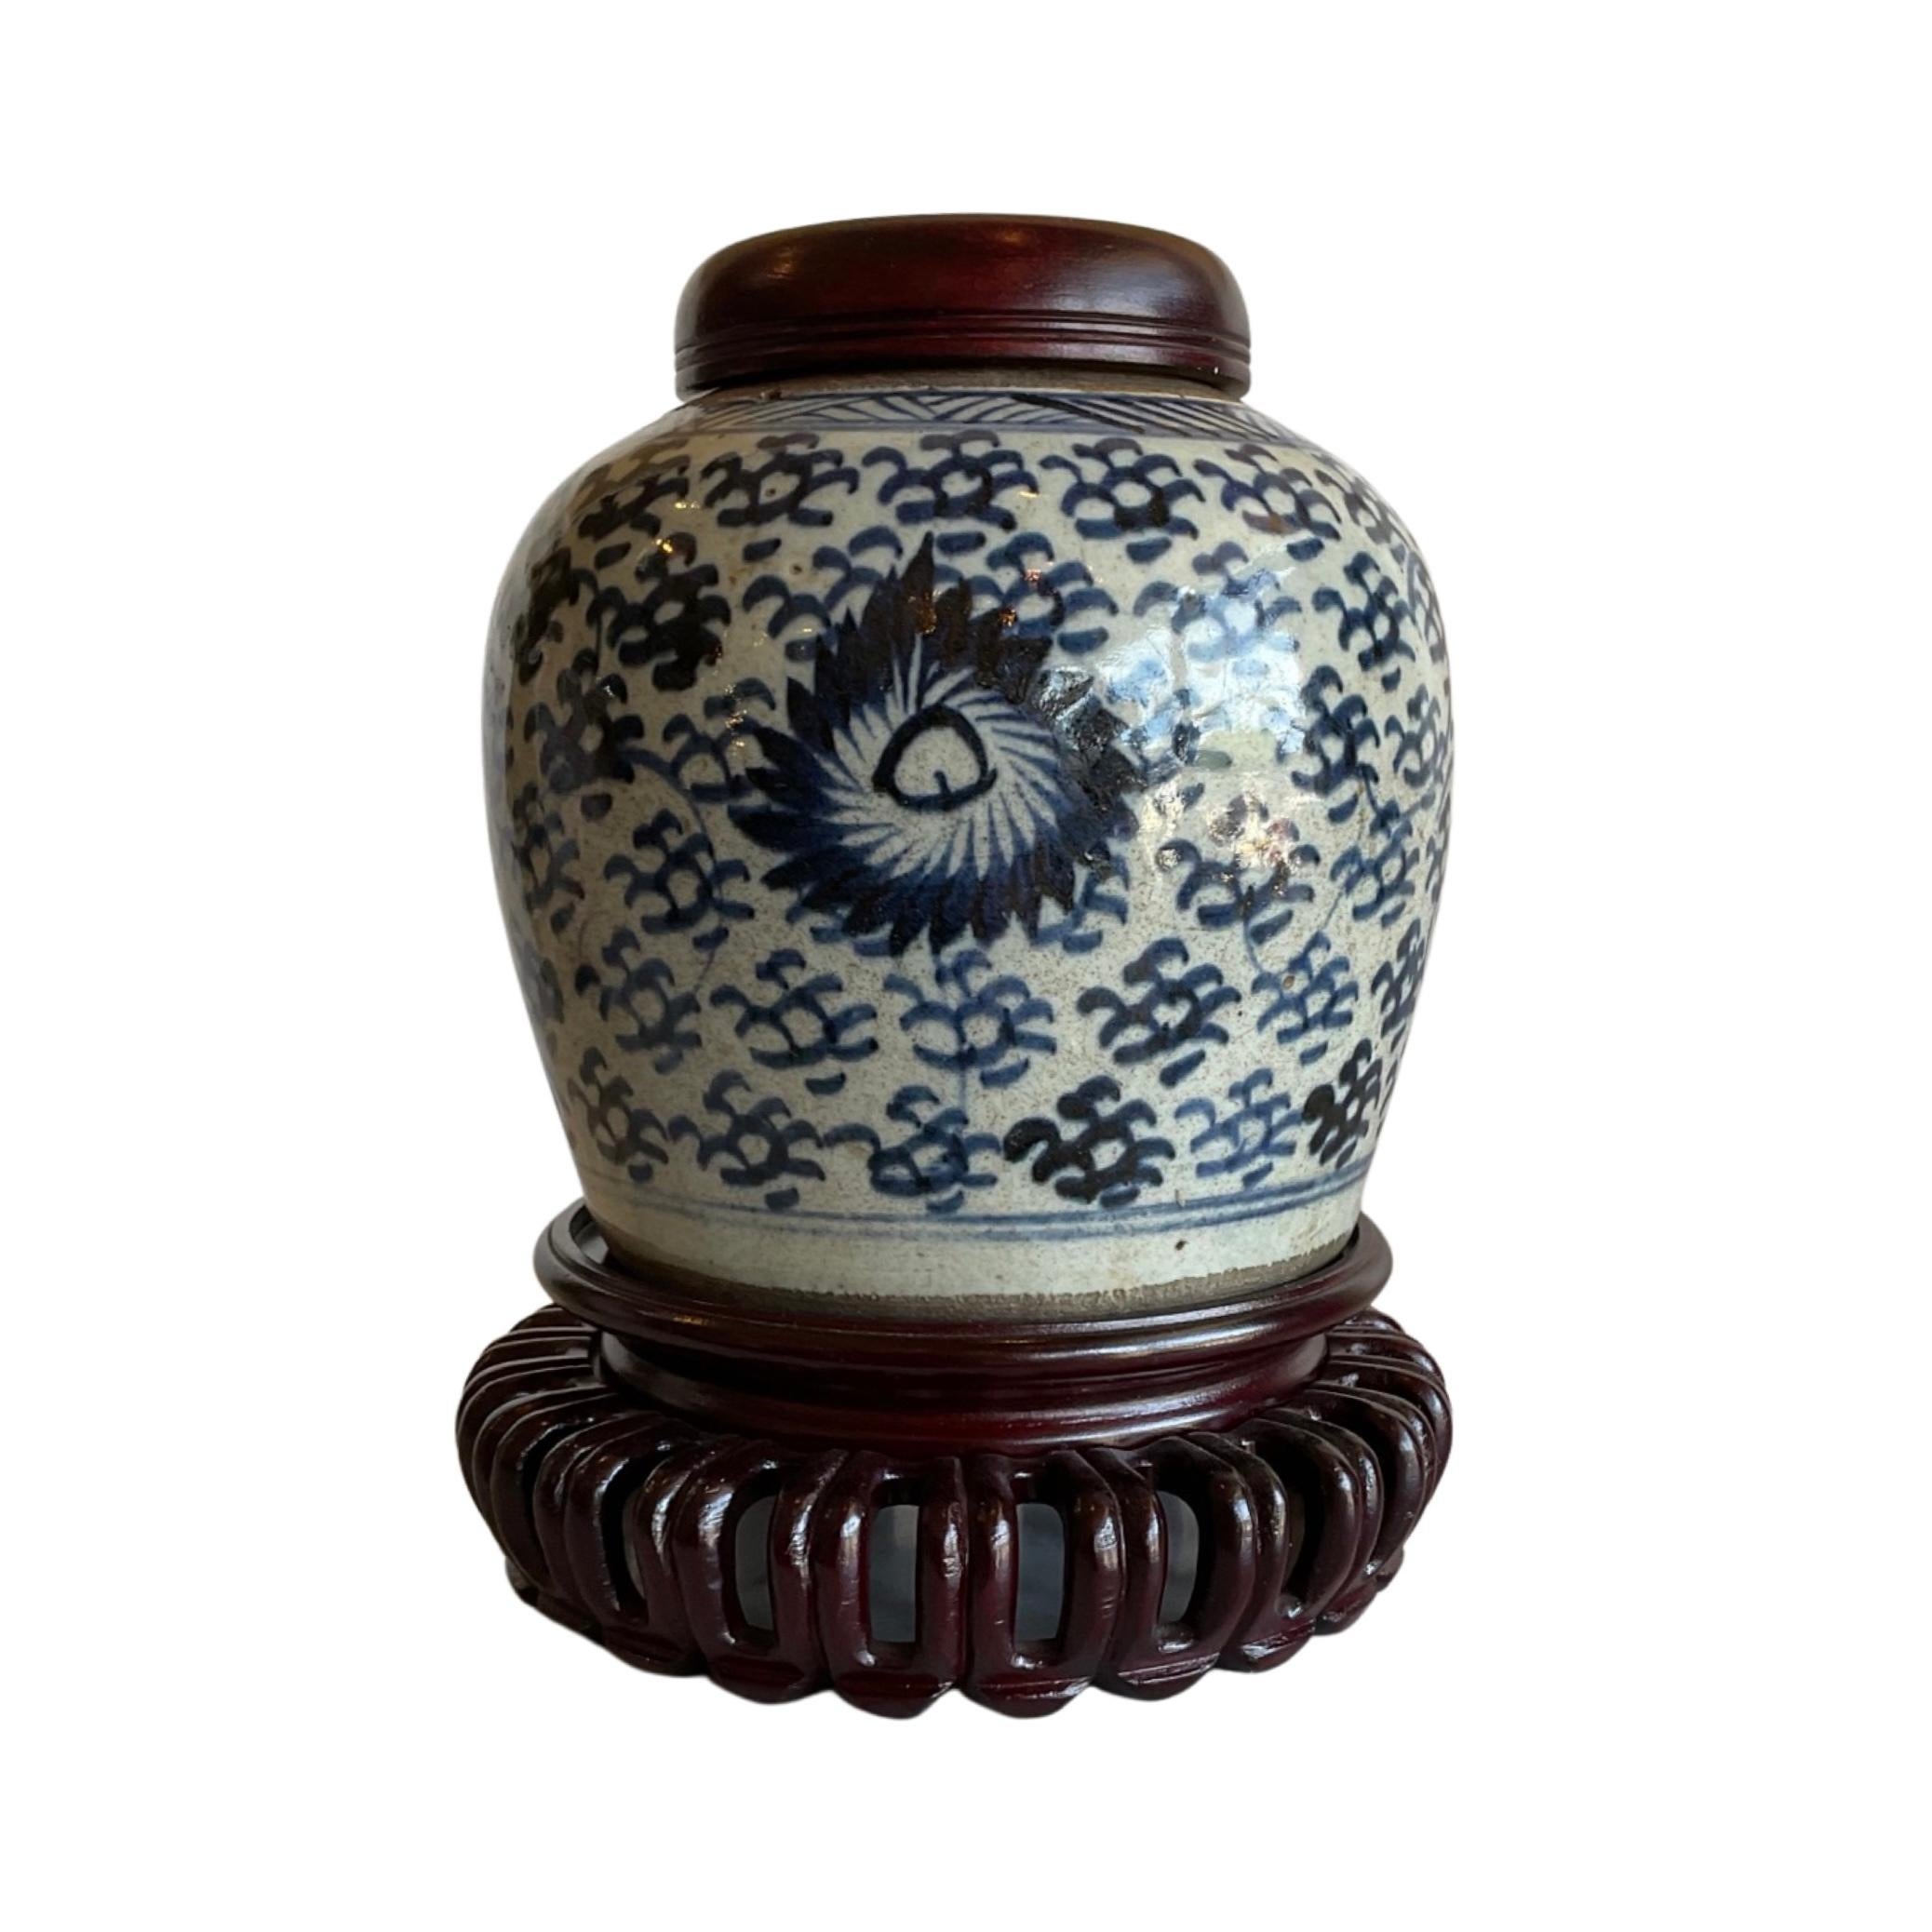 This exquisite 18th-century Chinese porcelain storage jar is beautifully crafted and comes complete with a wooden cap and stand. Perfect for storing a variety of items, it's an elegant and practical addition to any home.